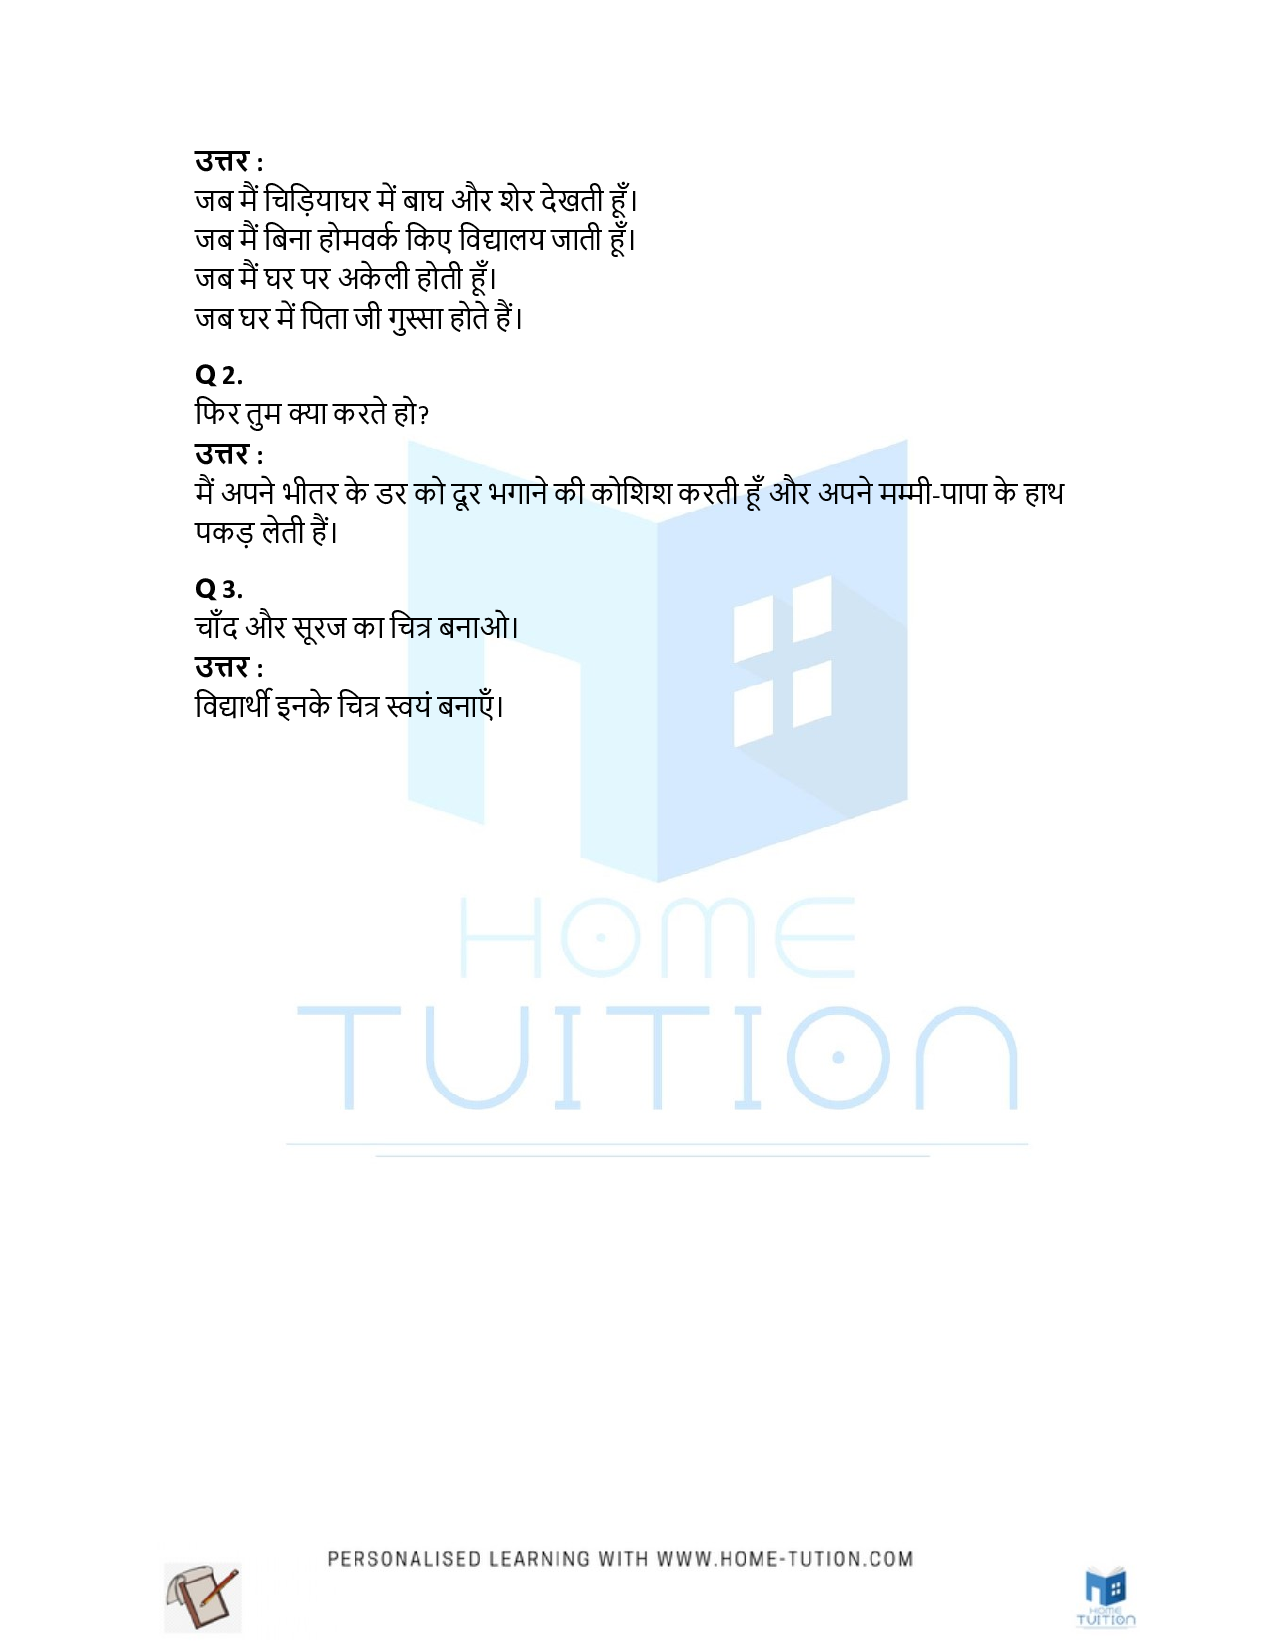 NCERT Solution for Class 1 Hindi Chapter 21 Halim Chala Chand Par (हलीम-चला-चाँद-पर)